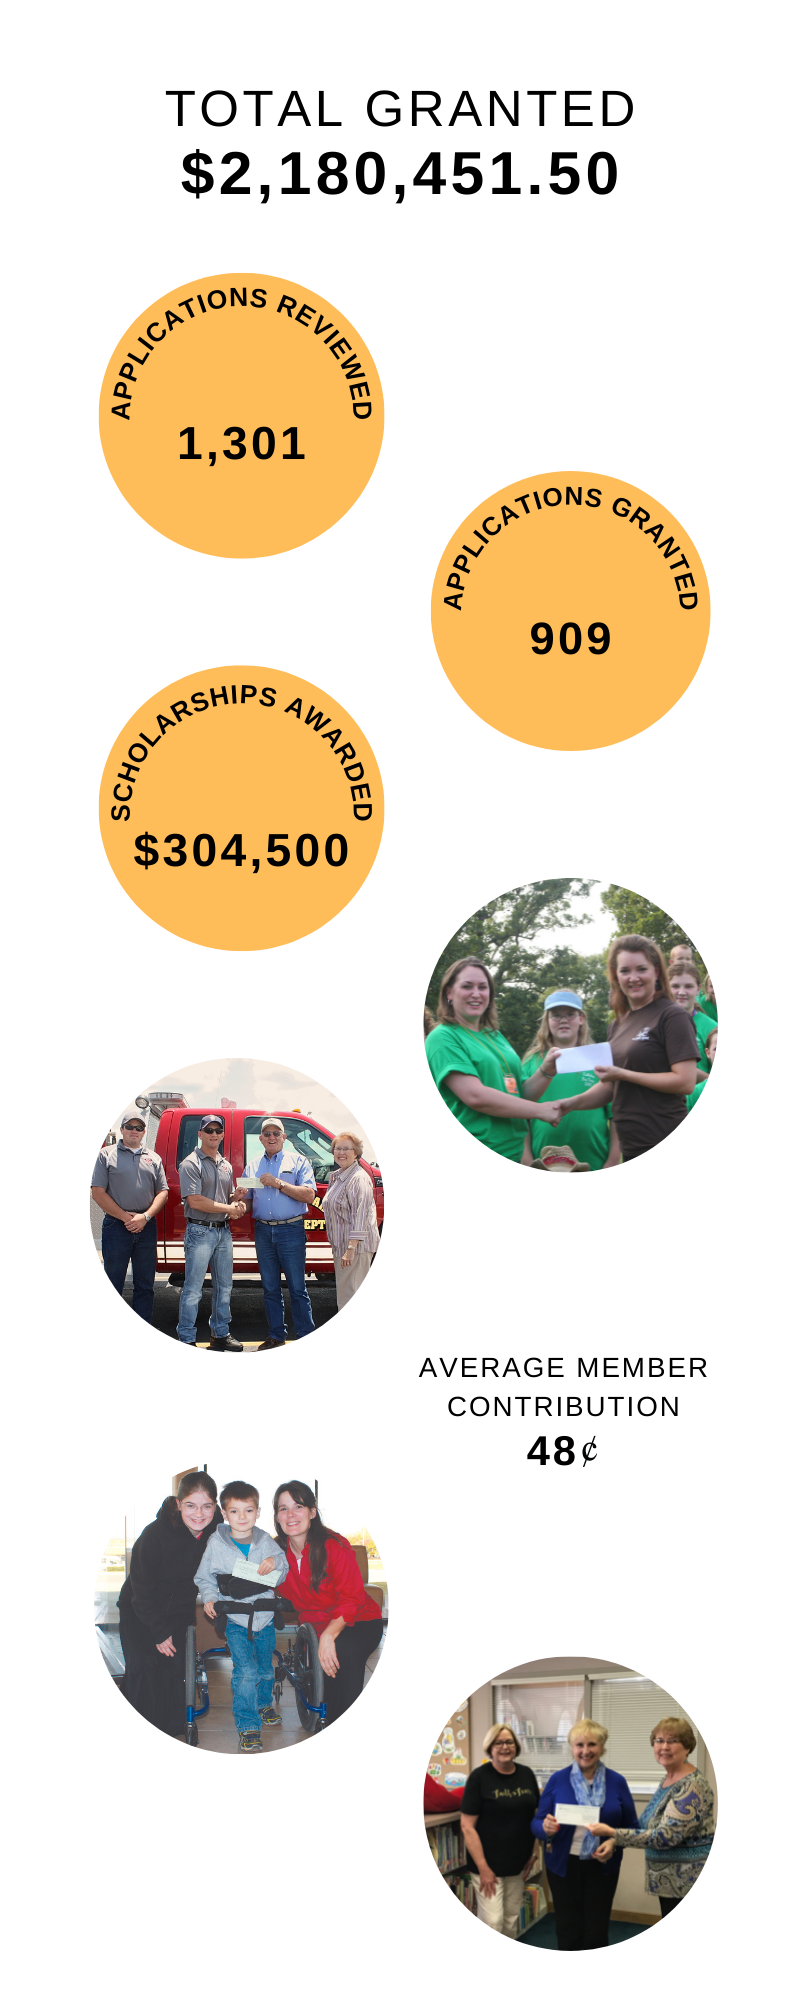 Total Granted: $2,180,451.50. Applications Reviewed: 1,301. Applications Granted: 909. Scholarships Awarded: $304,500. Average Member Contribution: 48 cents.